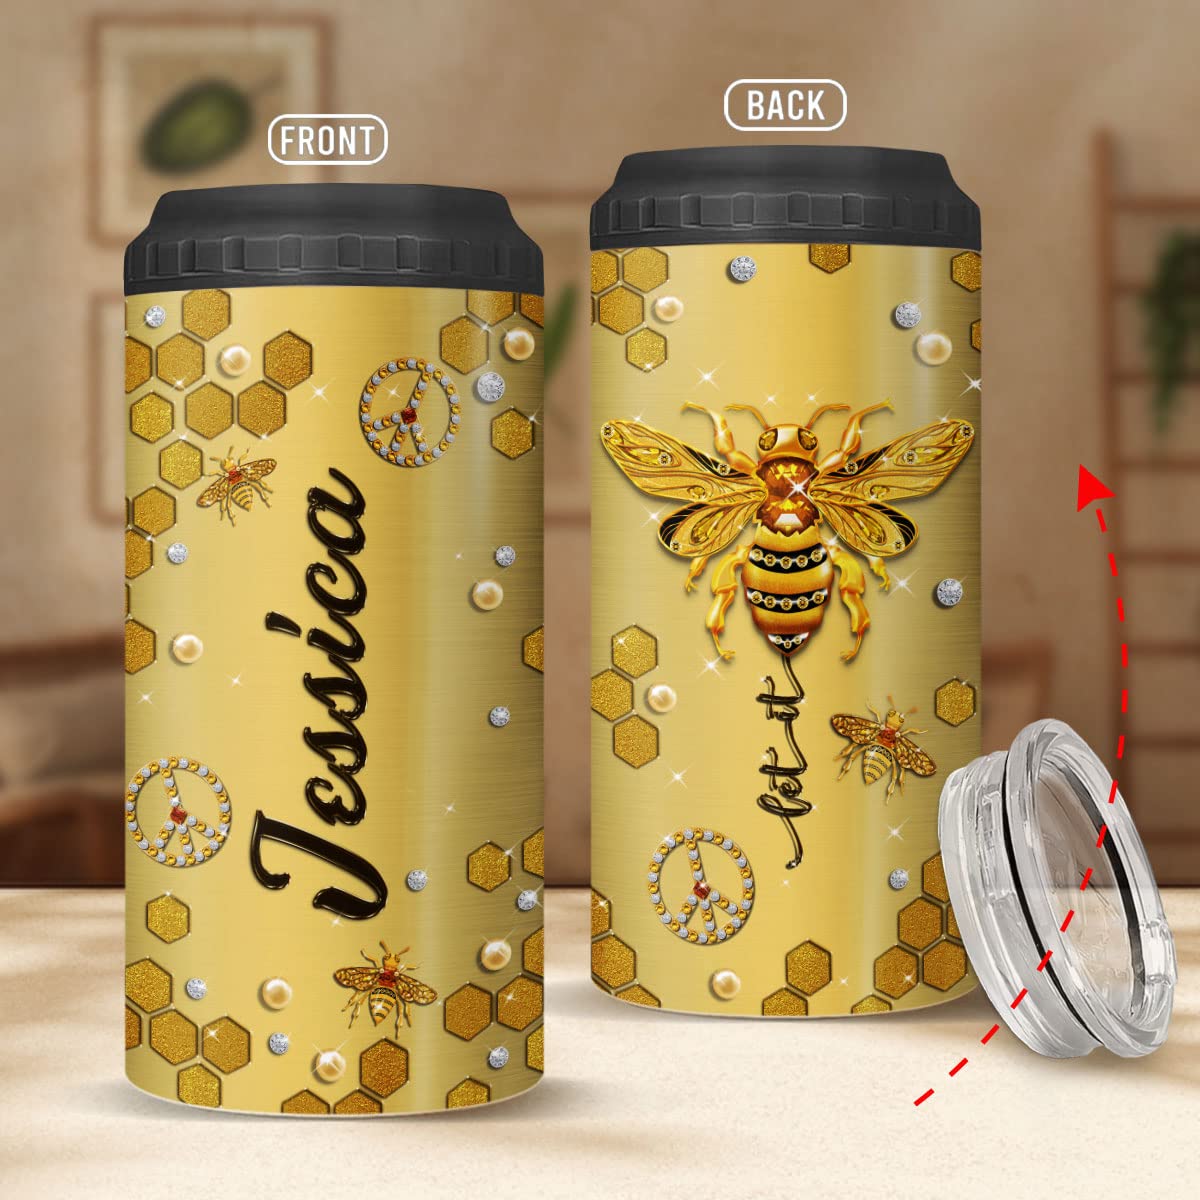 ZOXIX Personalized Can Cooler Let It Bee Gifts For Bee Lovers Women Jewelry Style Stainless Steel Tumbler Insulated Can Holder Travel Cup 16 Oz 4-in-1 Hippie Bee Themed Items